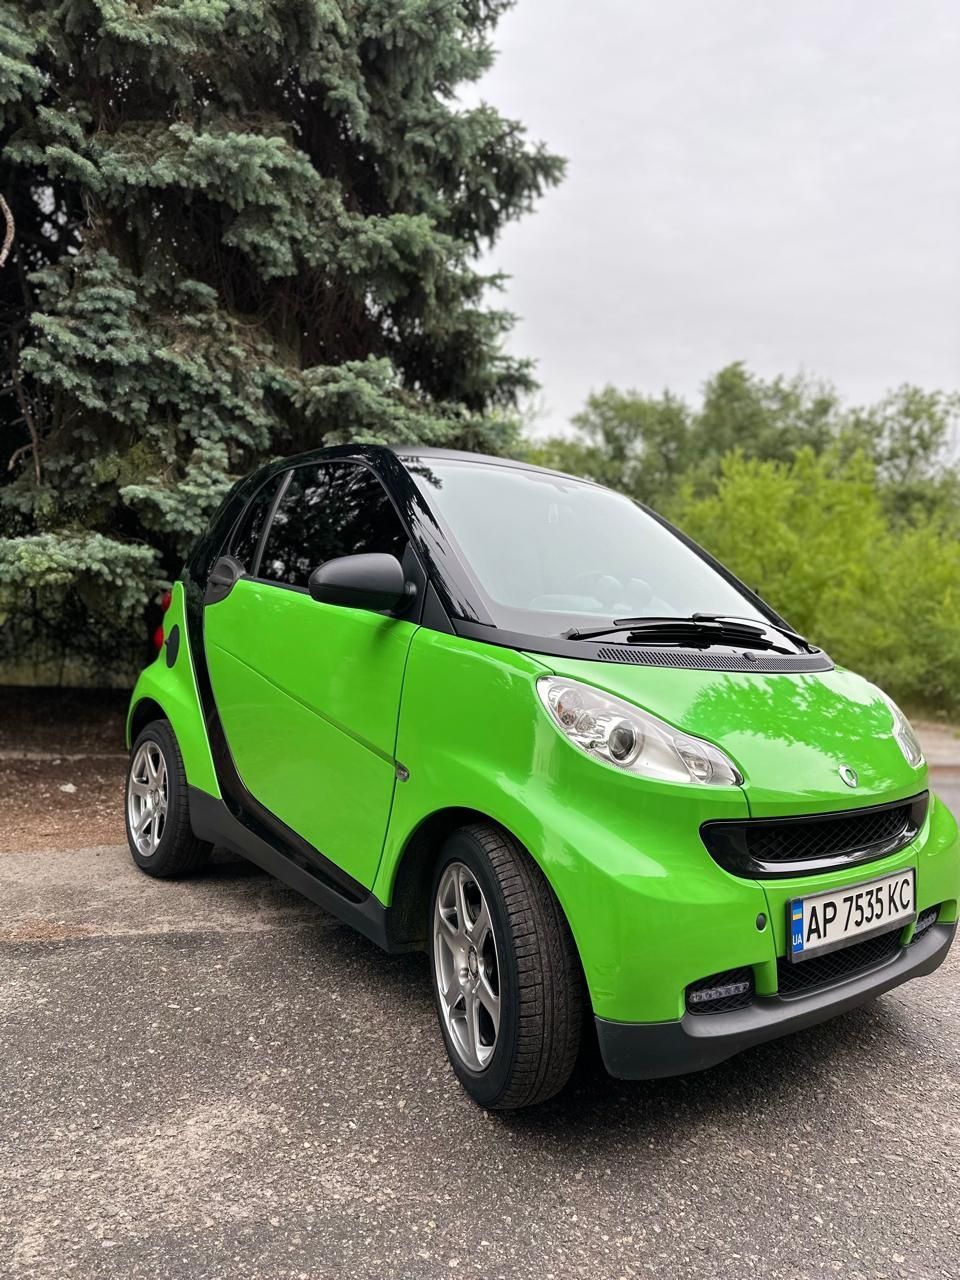 Smart 451 fortwo